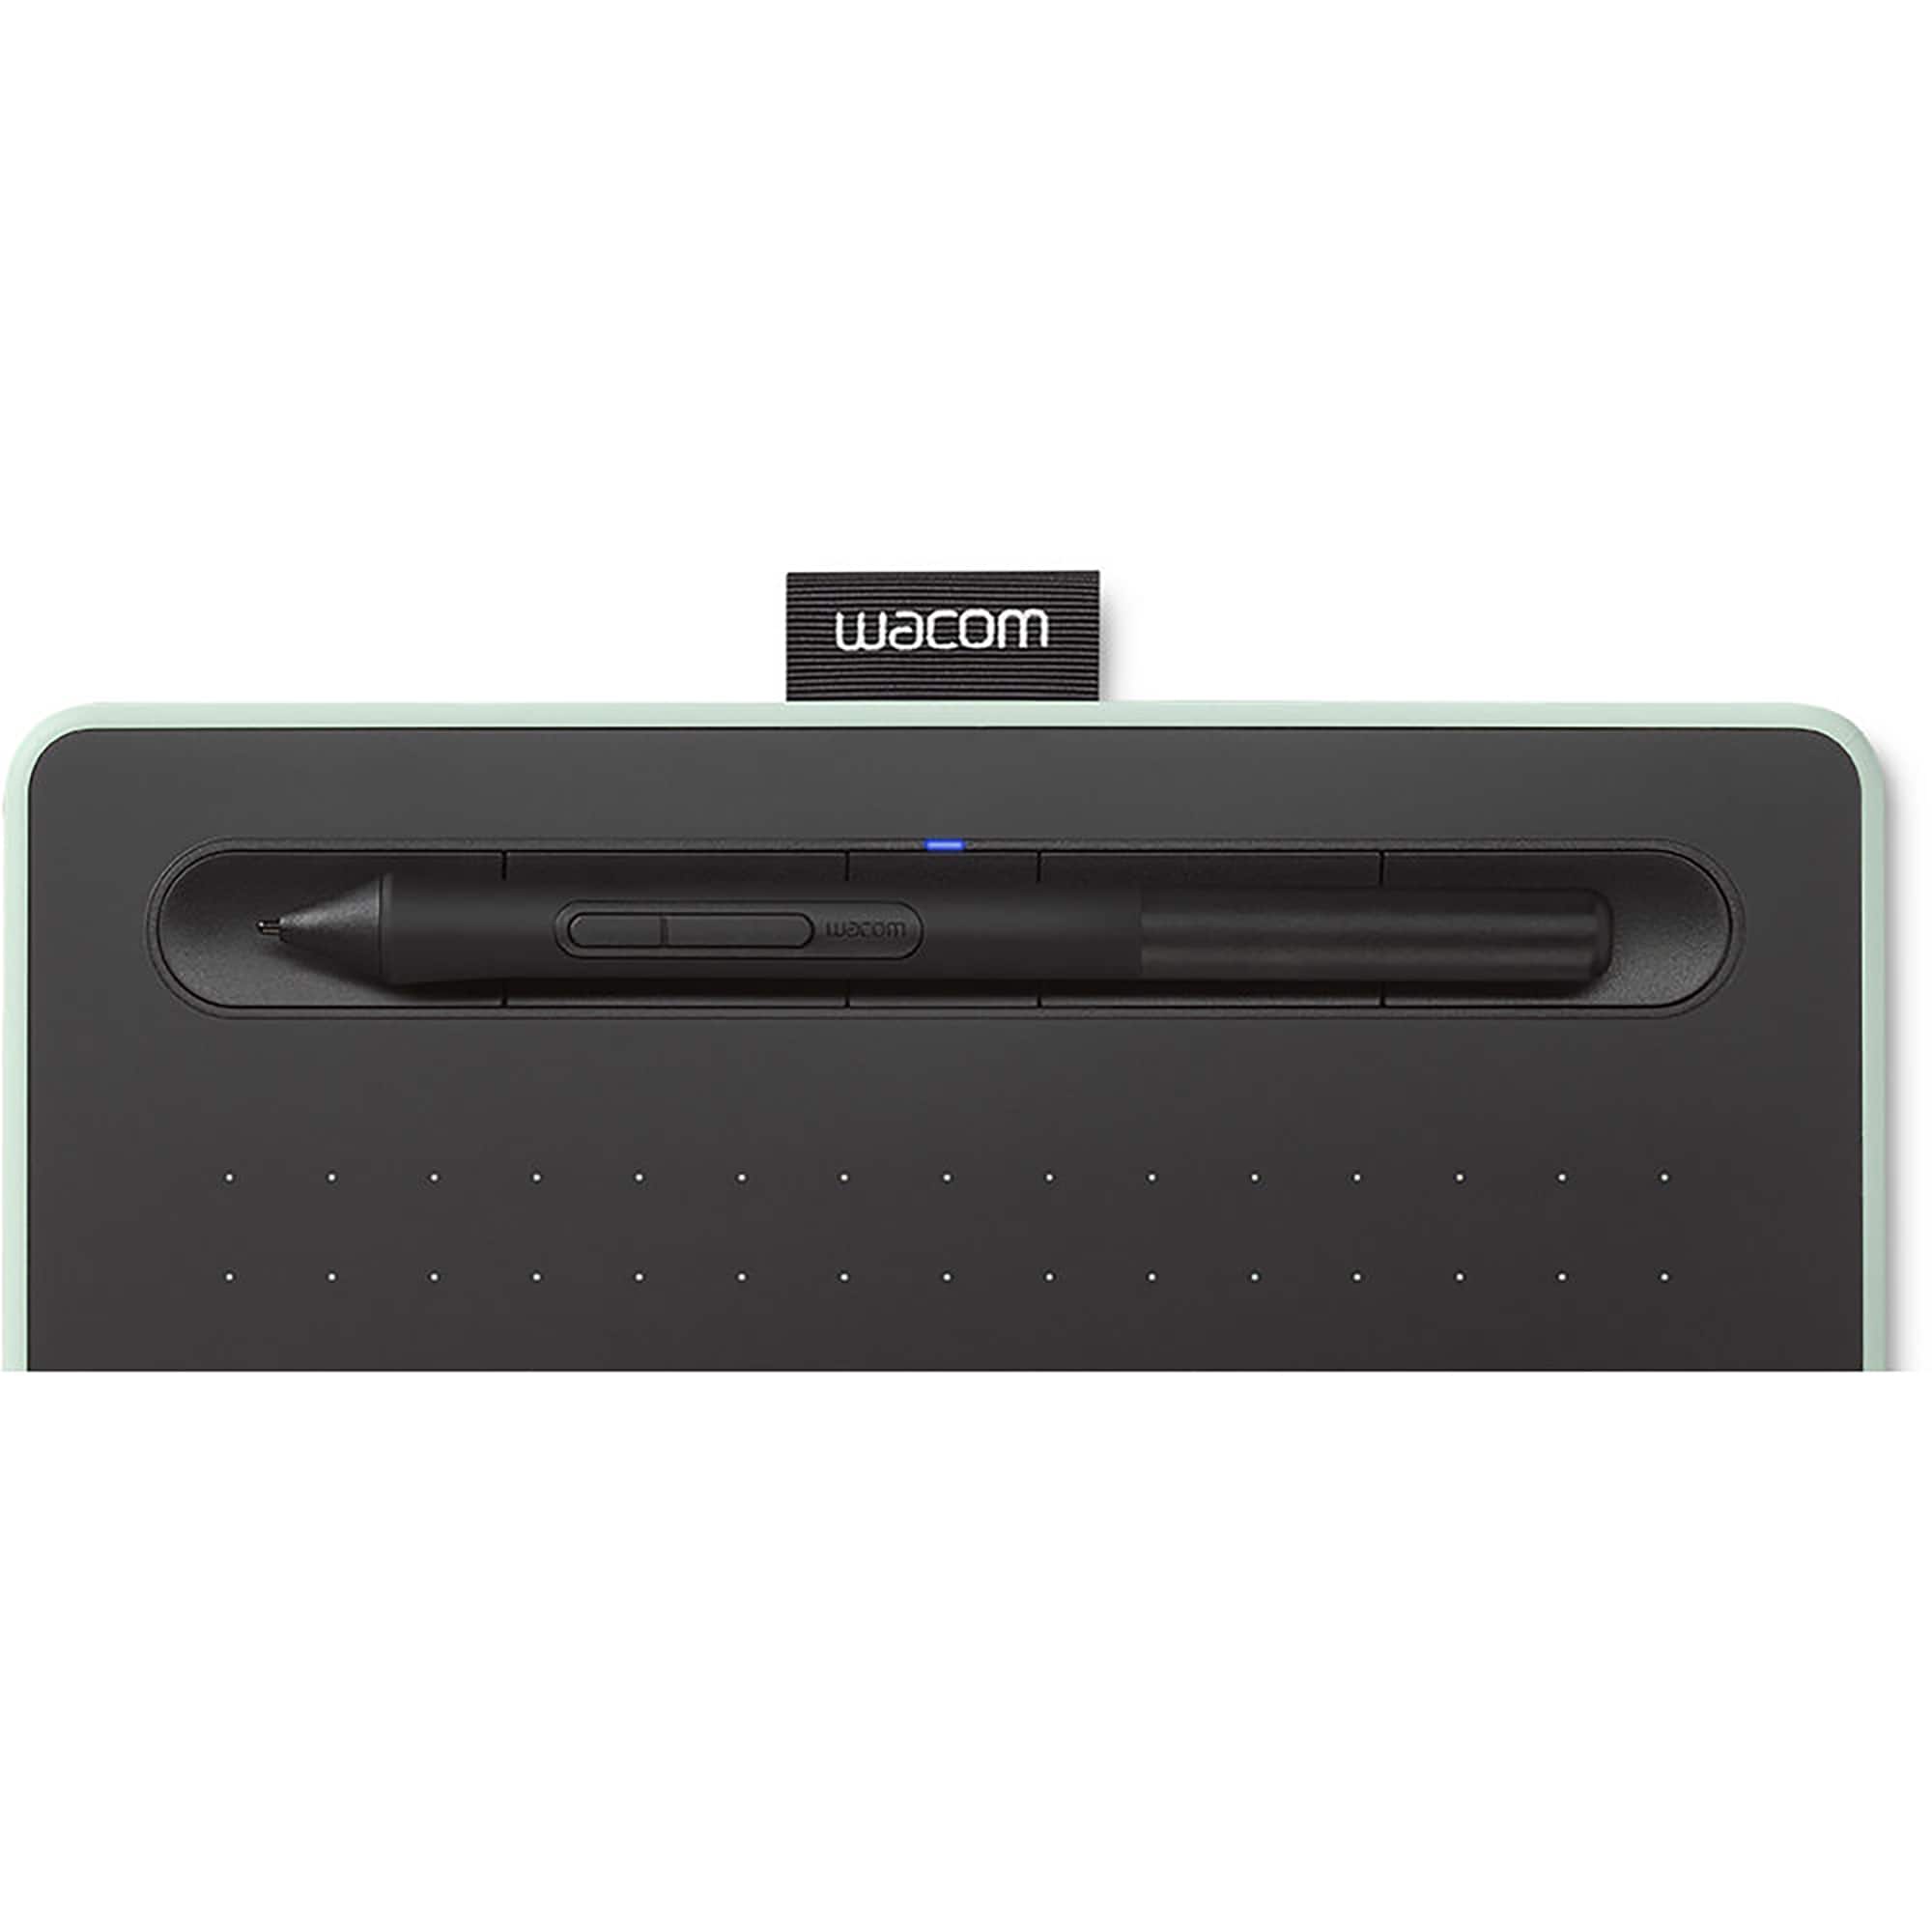 Wacom Intuos Graphics Tablet with Software